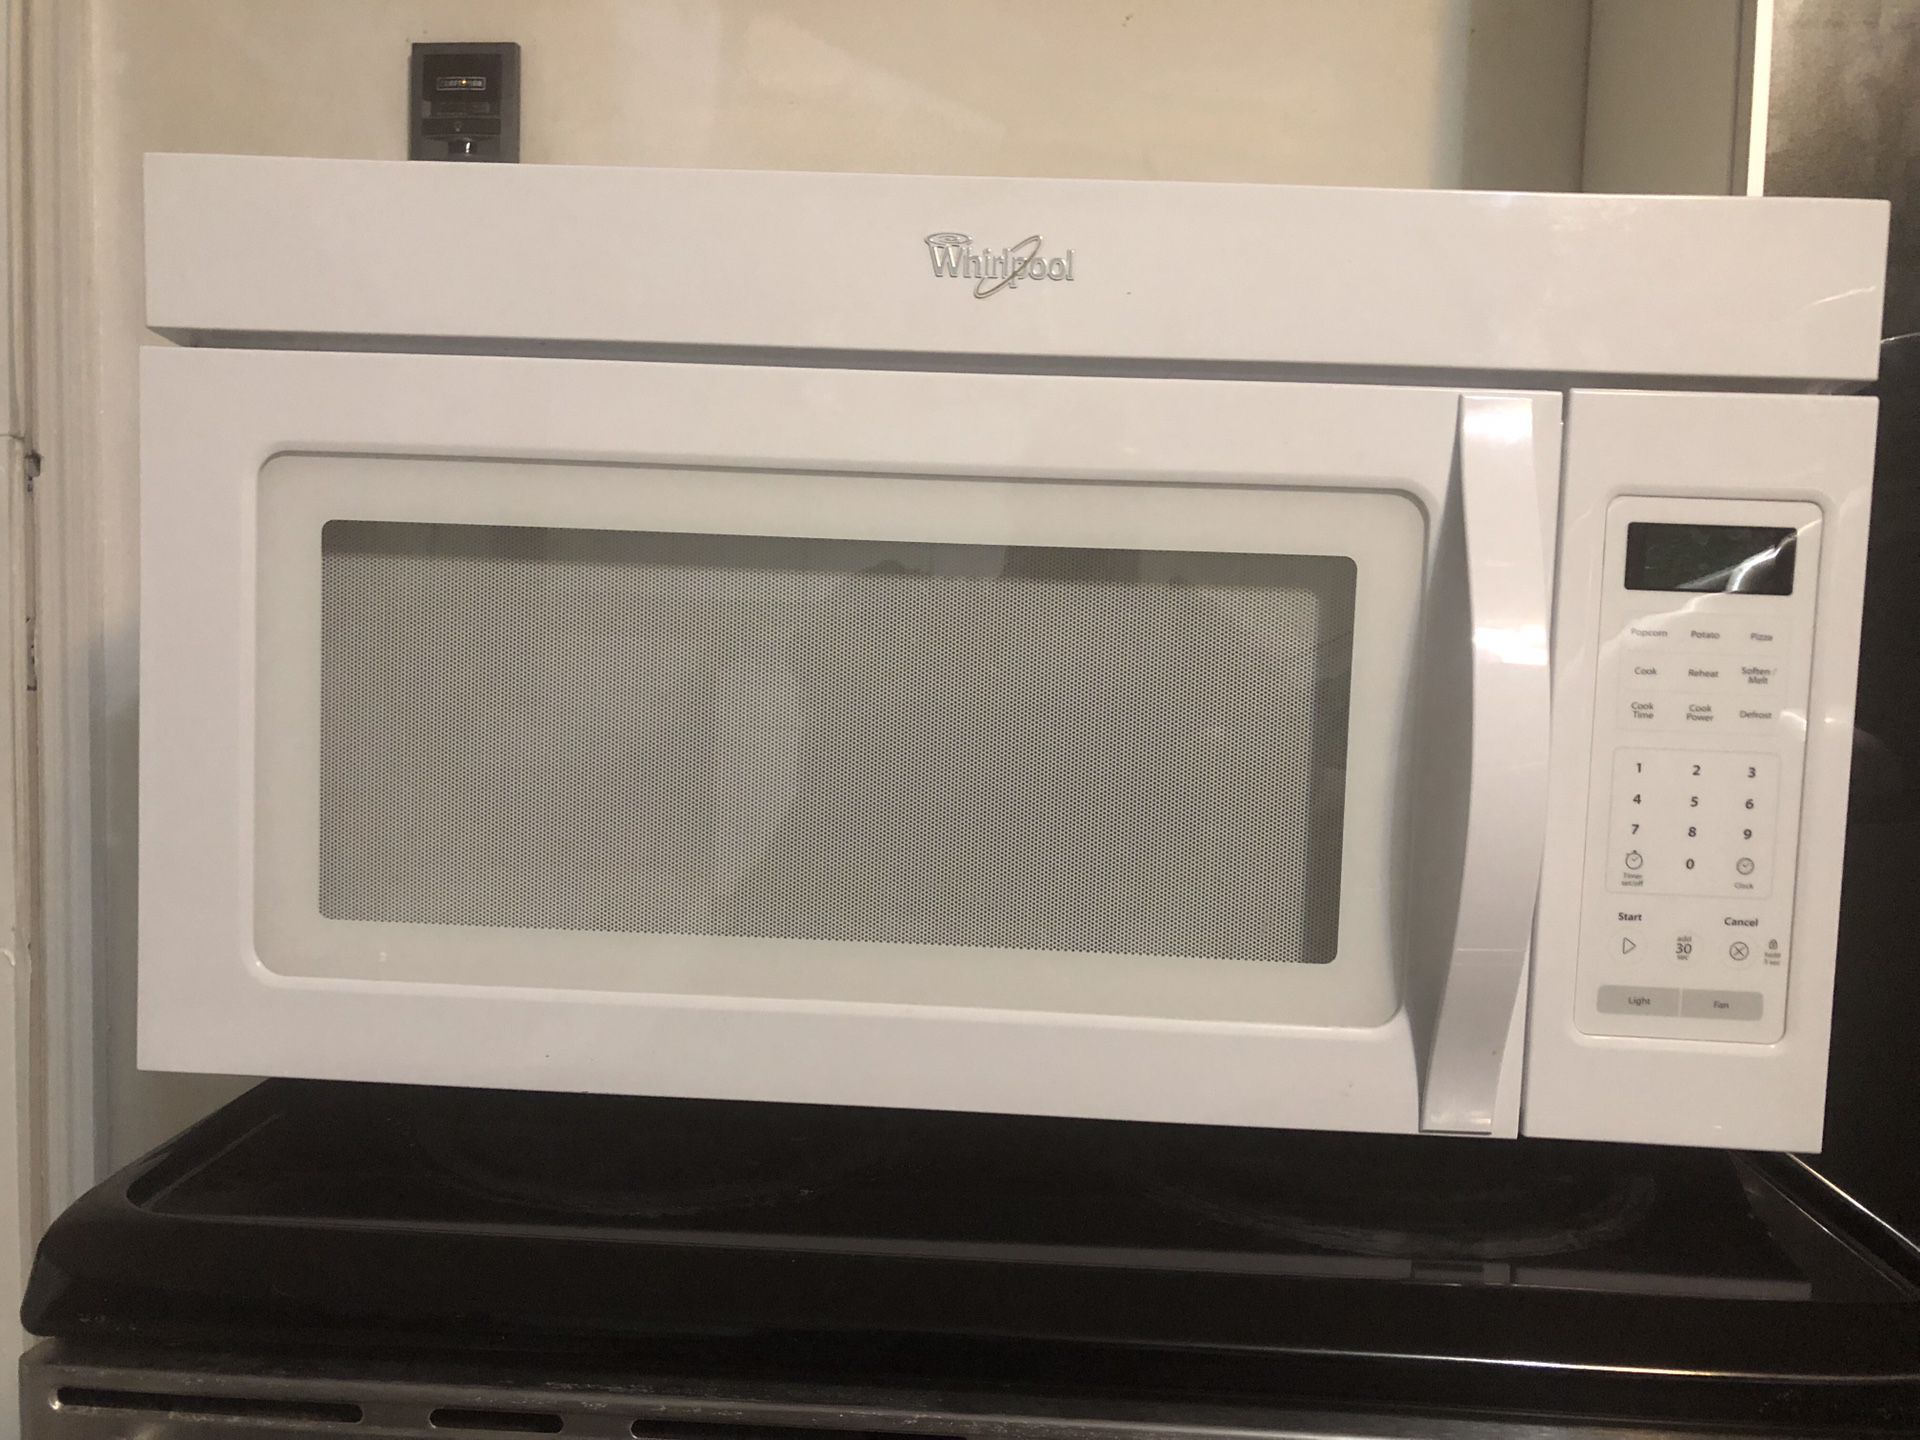 Microwave in Great condition.